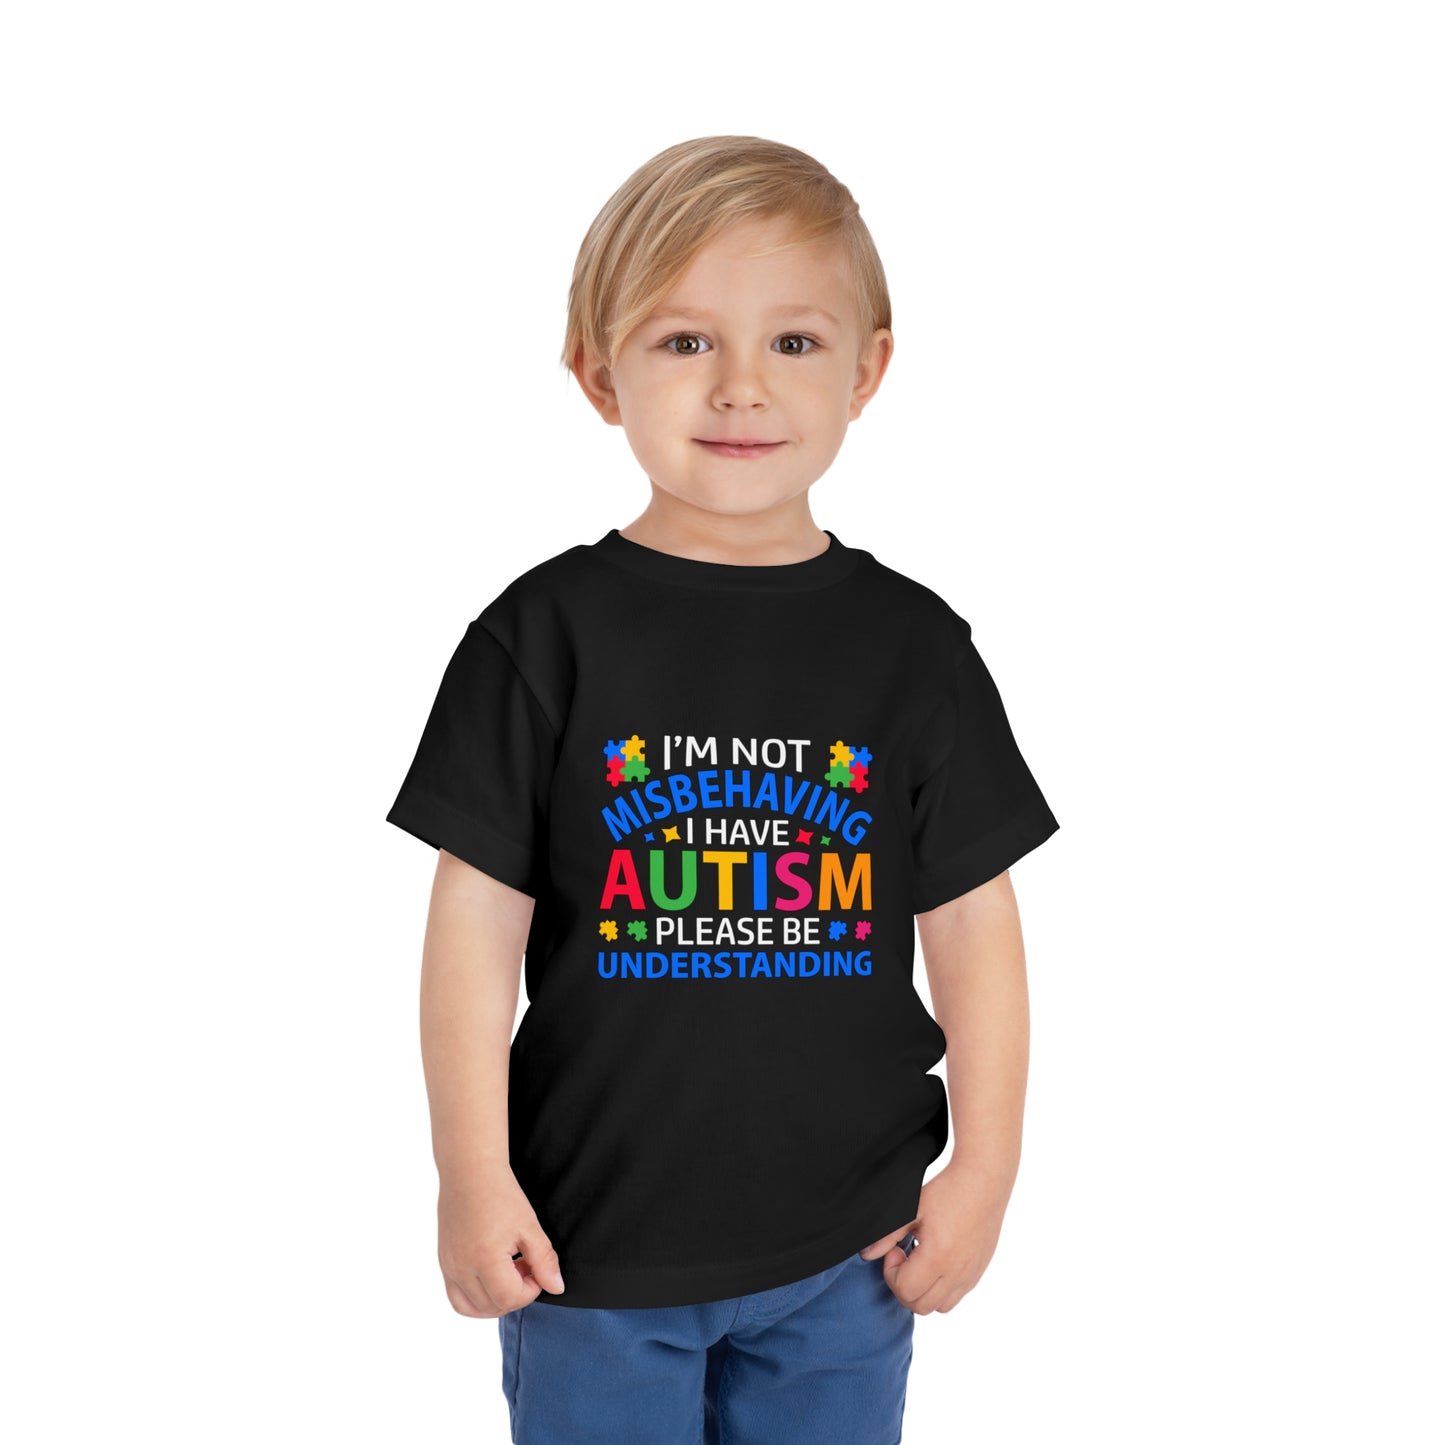 I Have Autism - Autism Awareness Advocate Toddler Short Sleeve Tee